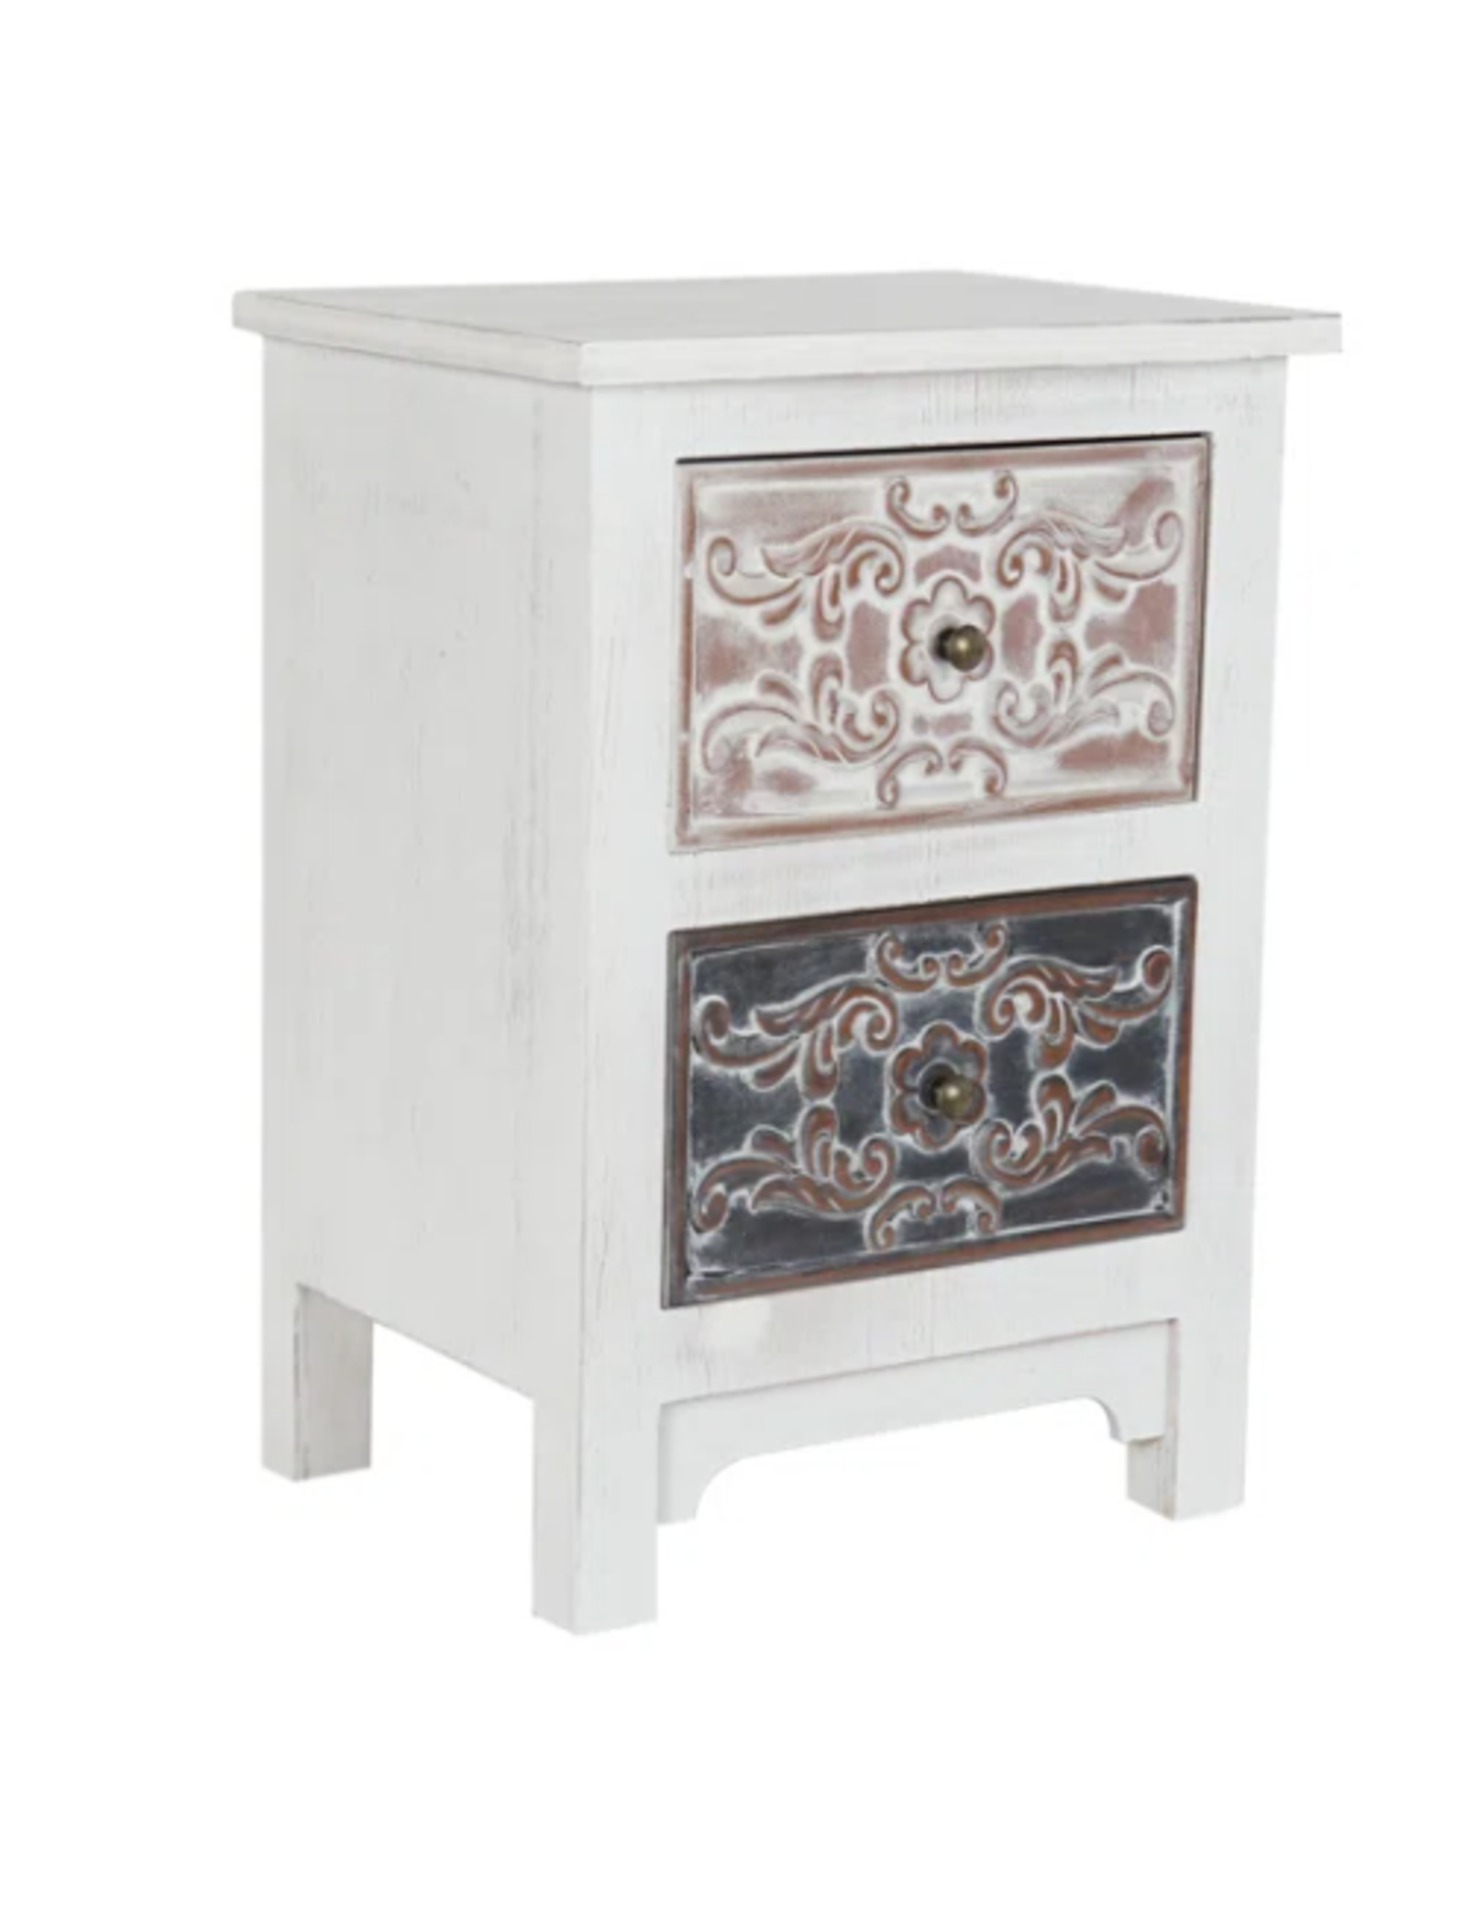 August Grove Cecillia Solid Wood Bedside Table. SR4. RRP £299.99. This elegant design will bring